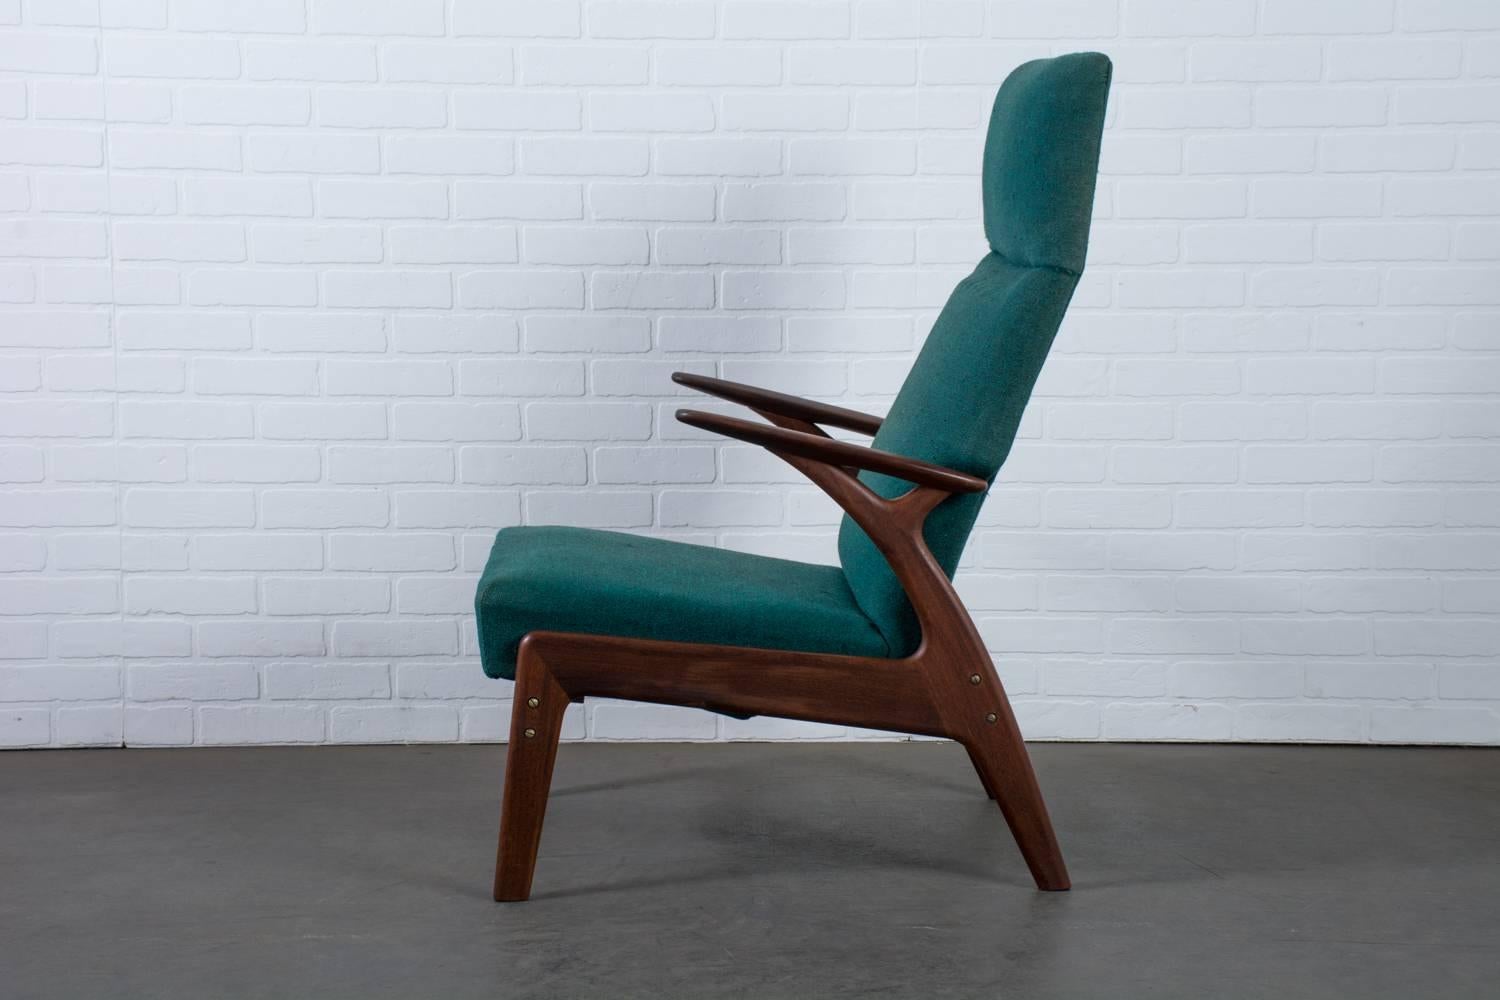 This vintage midcentury lounge chair was designed by Christian Sorensen for Gorm-Mobler, Denmark, circa 1960. It can be reclined and has an adjustable ottoman that pulls out from under the seat (which is cleverly hidden when not in use). The frame